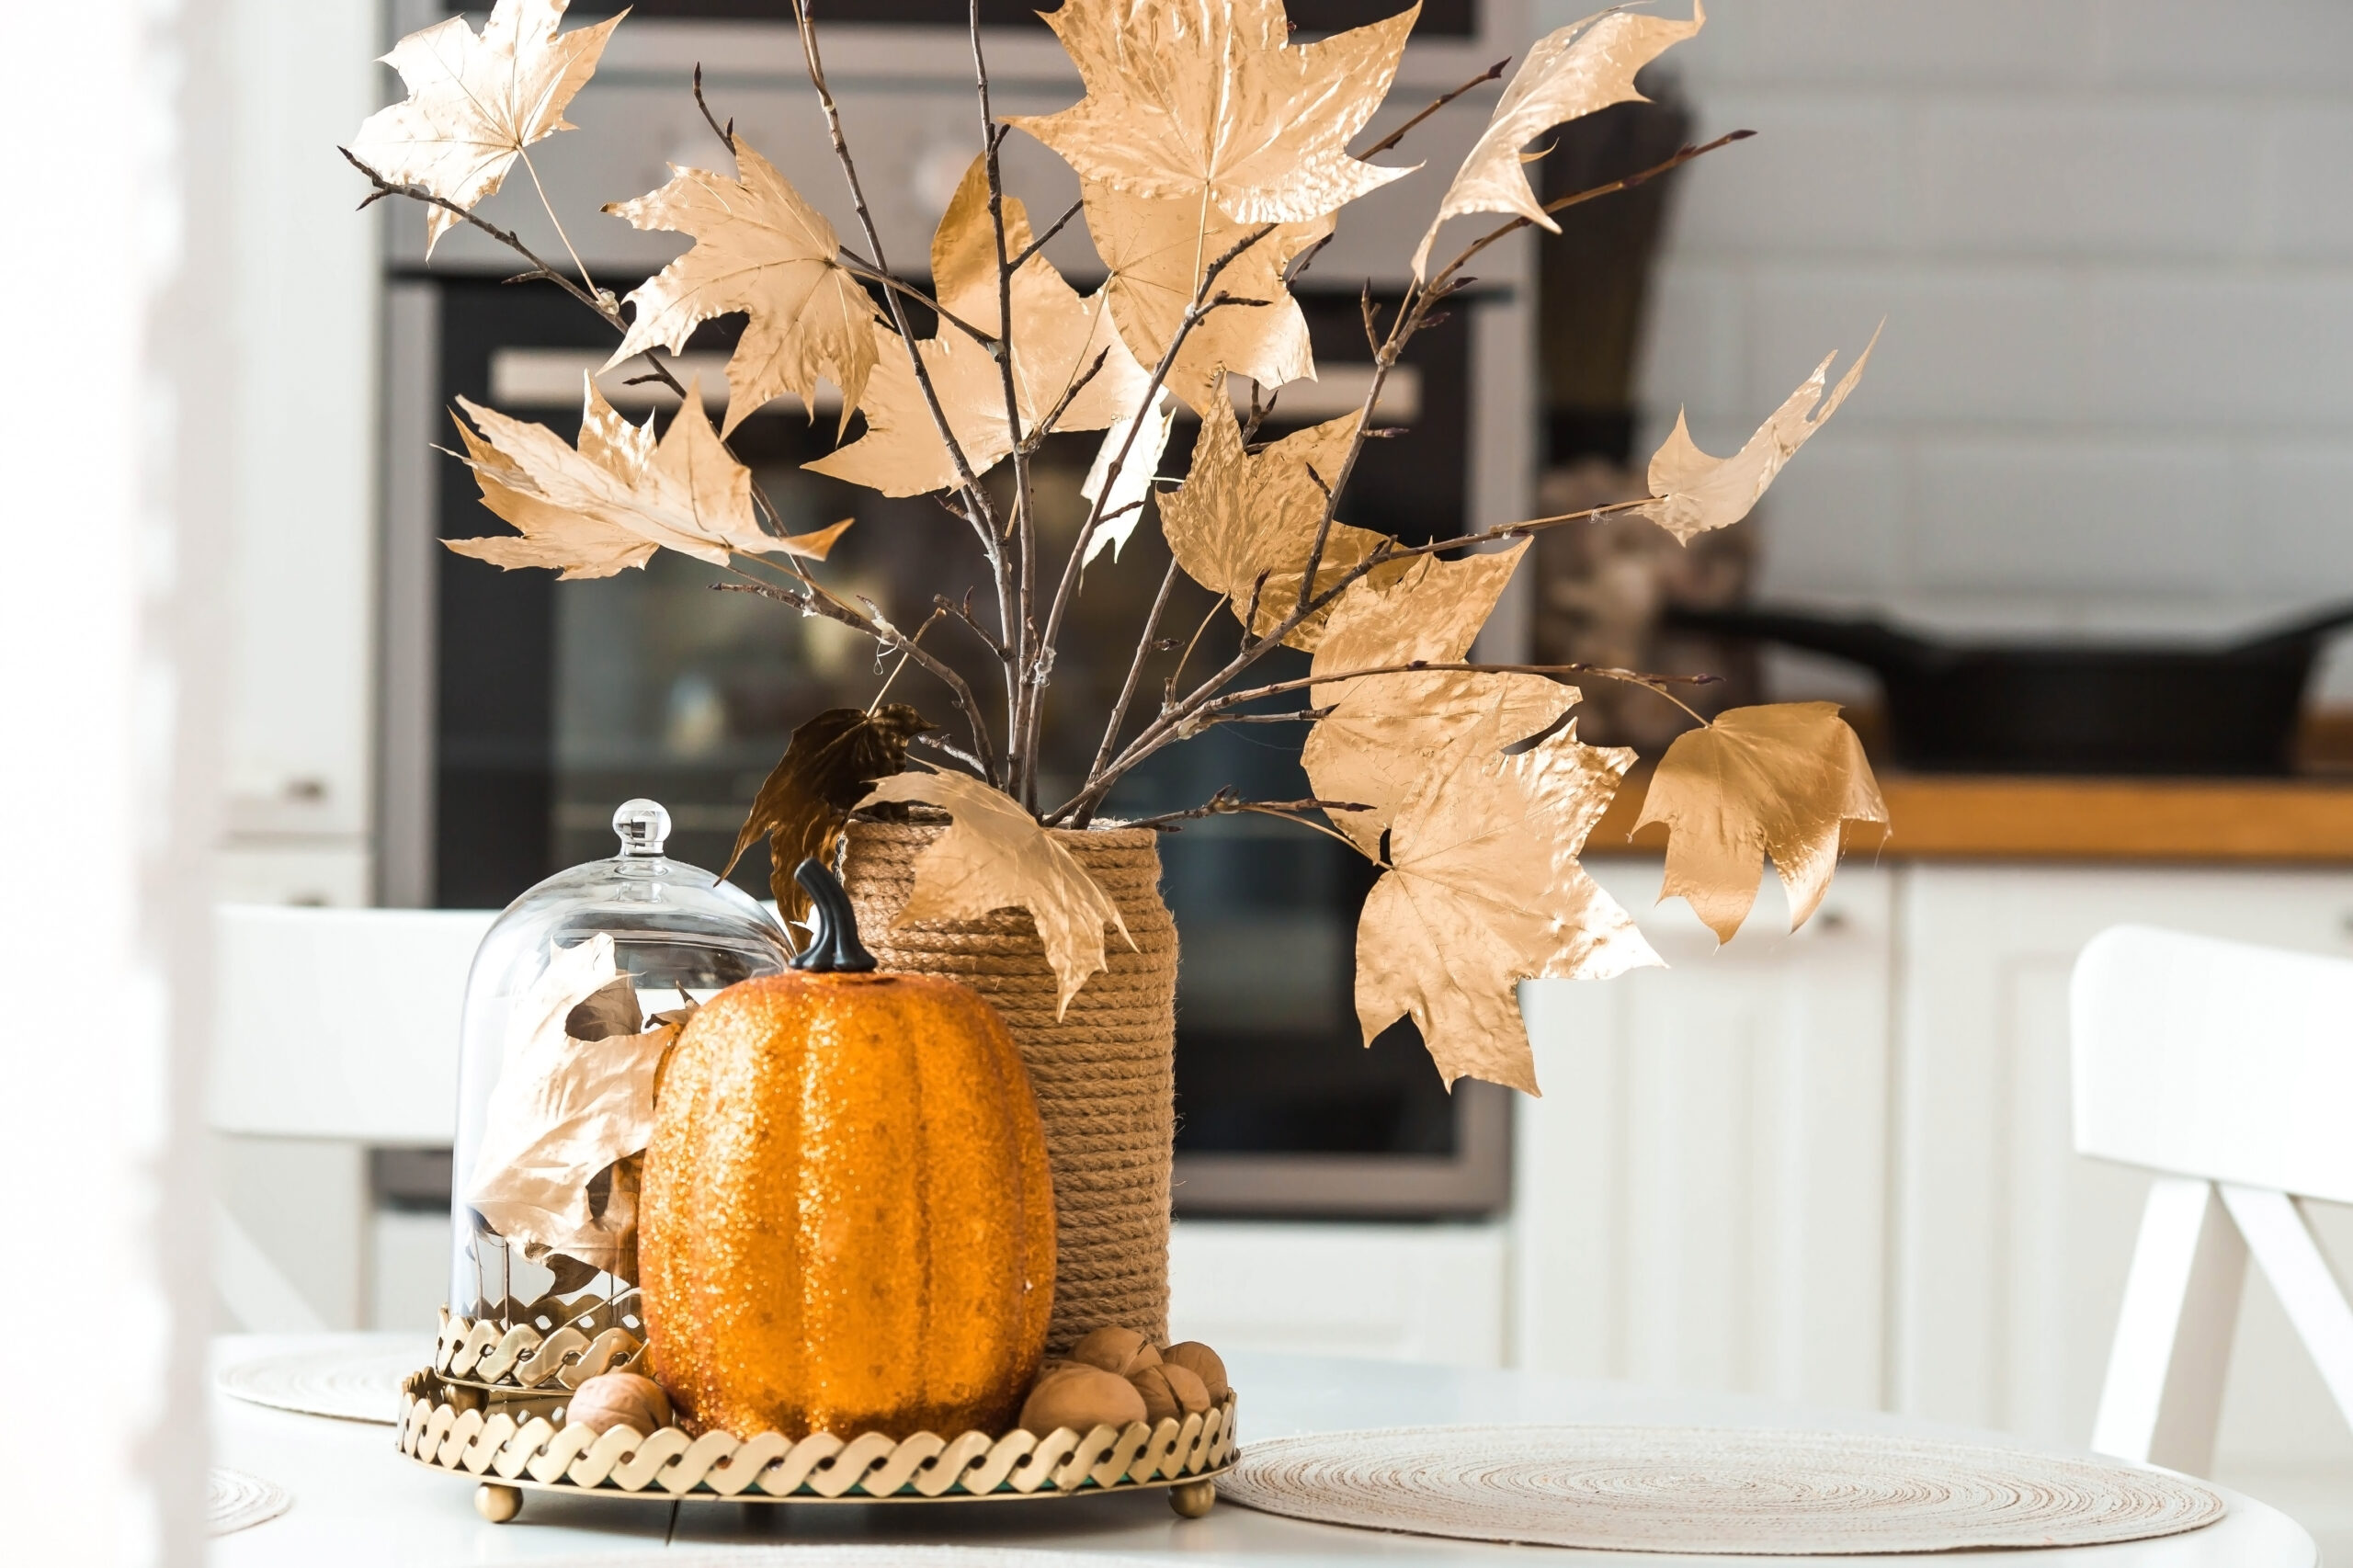 Branches with Golden leaves and a pumpkin on a tray. In the back